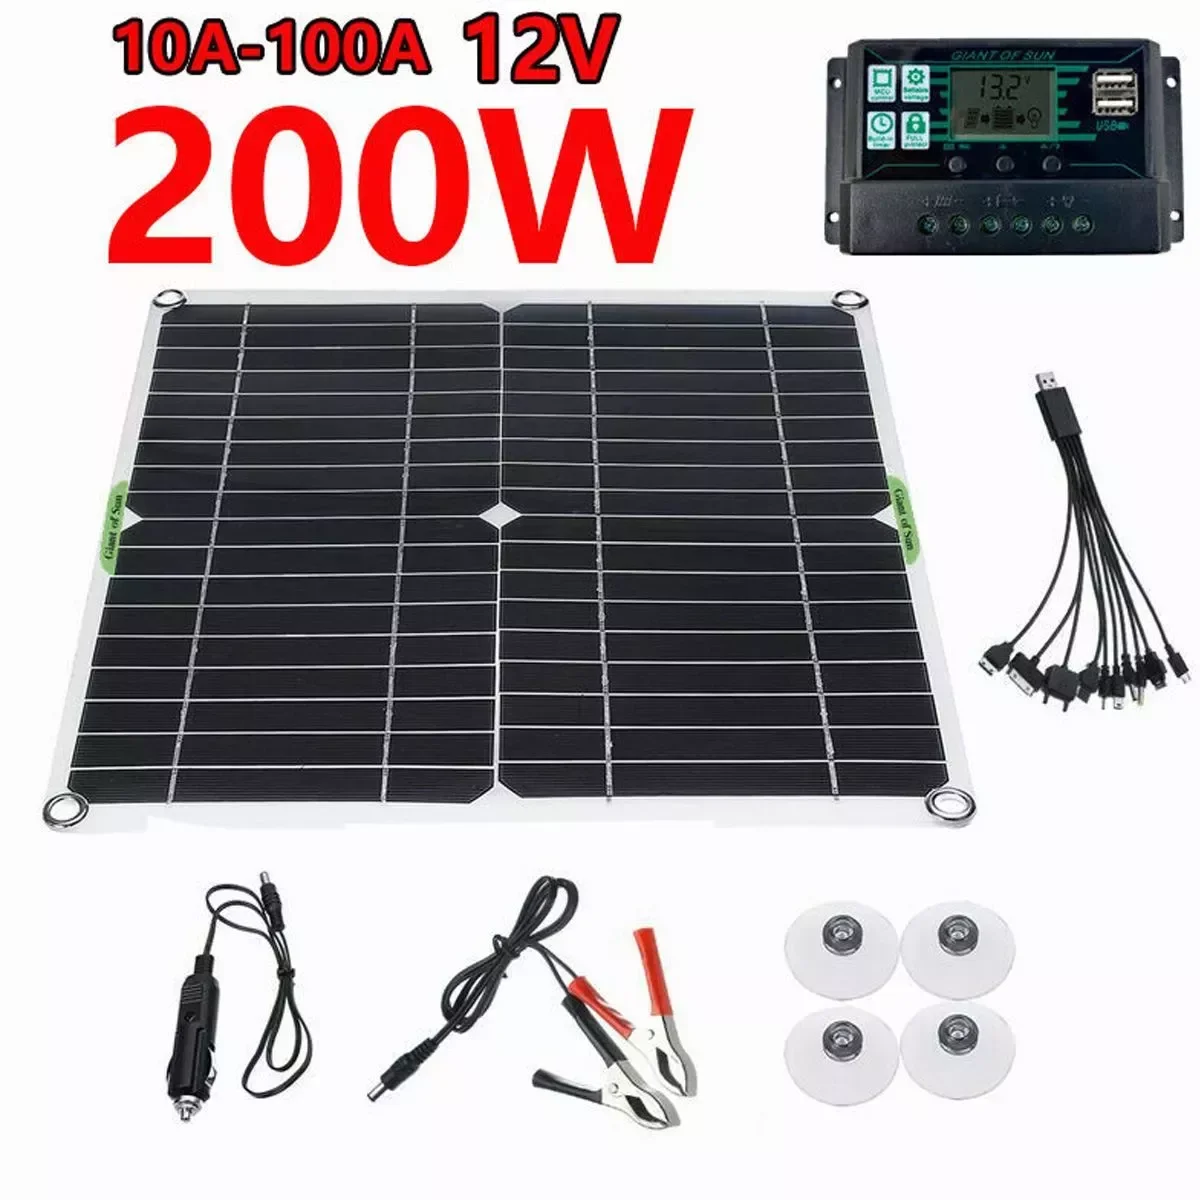 

NEW2023 New in Panel 200W 100A Controller 5V Dual USB Port Outdoor Portable Battery Charger For Mobile Phone Car Yacht RV Lights